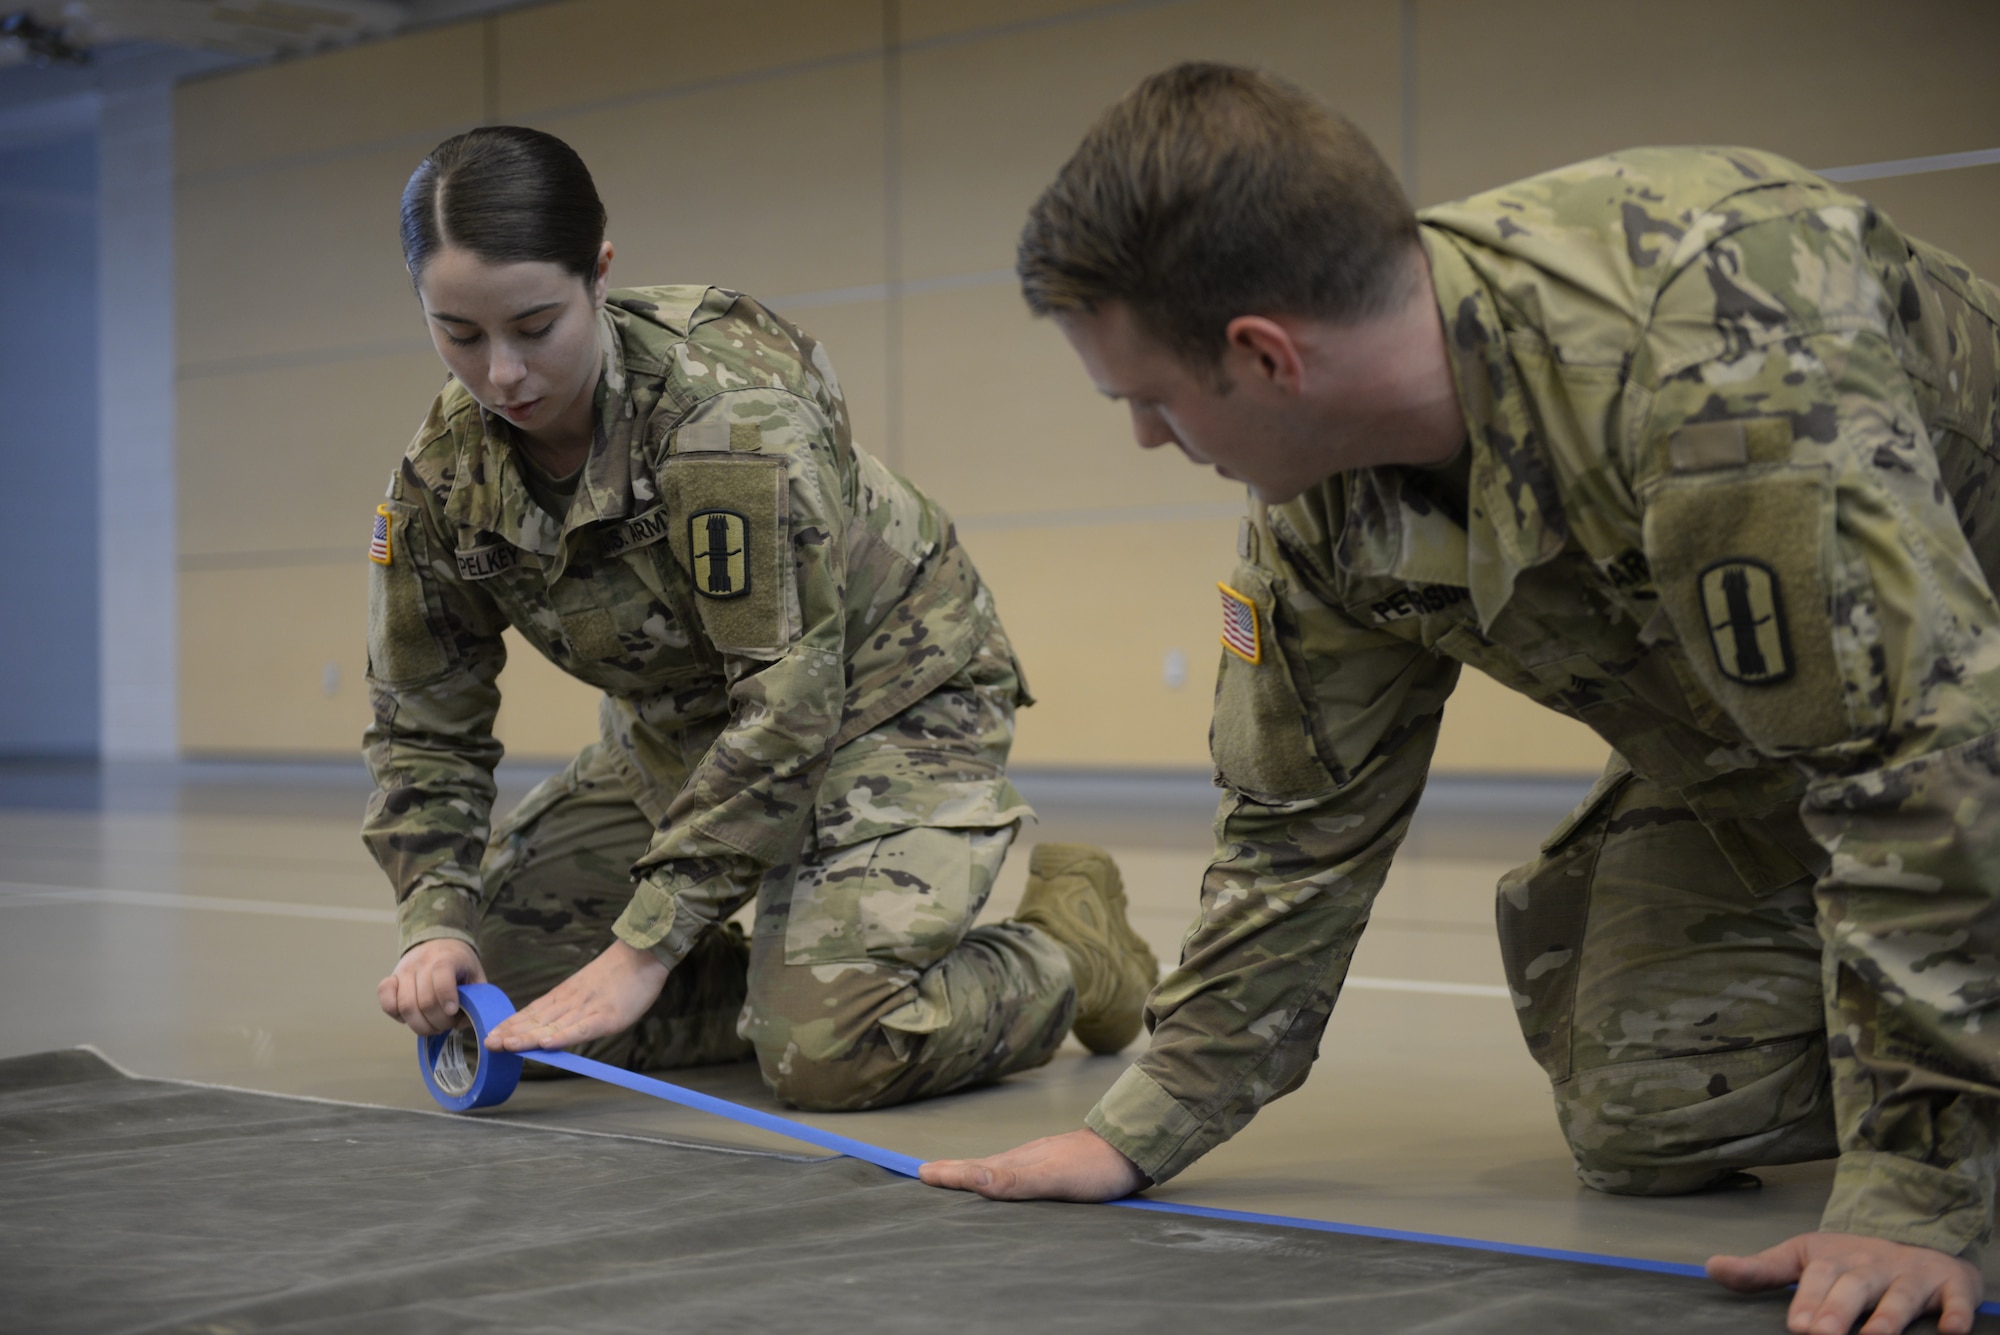 Pvt. Mackenzie Pelkey, a fire control specialist, 197th Fires Artillery Brigade, and Sgt. Robert Peterson, a motor transportation operator, 744th Forward Support Company, New Hampshire Army National Guard, help prepare the floor of the Hamel Recreation Center at the University of New Hampshire, March 25, 2020. The facility will augment area hospitals treating COVID-19 cases, if necessary. It is one of nine the New Hampshire National Guard plans to set up and manage across the state. (U.S. Air National Guard photo by Tech. Sgt. Aaron Vezeau)